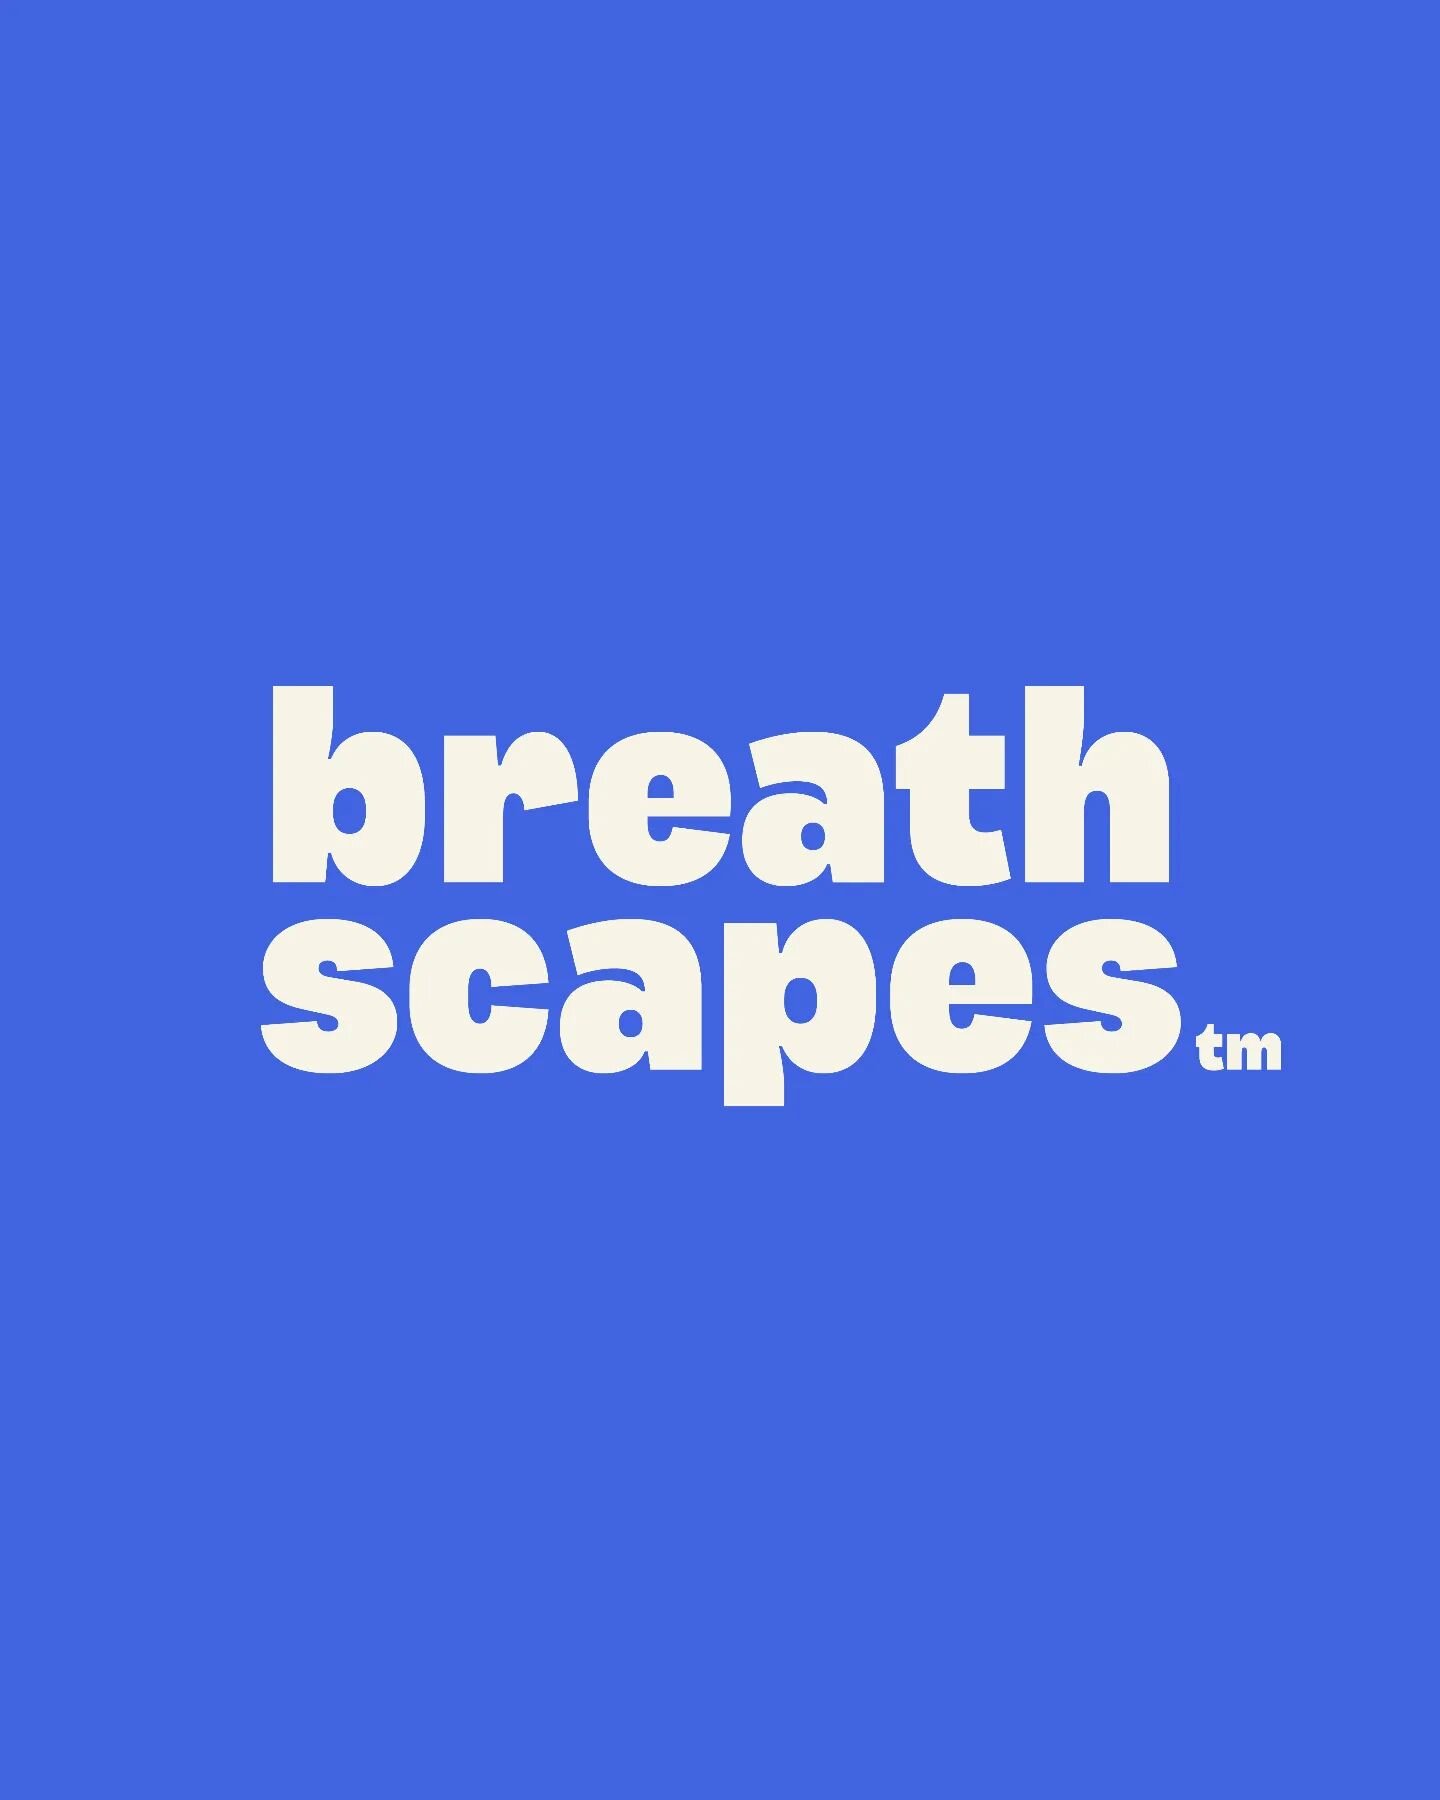 Breathscapes are Exhale's unique interval breathing soundbites. With options from three to ten seconds, you can use them in various situations, including exercising, meditating, concentrating, or helping to relieve anxiety and stress.

Open the Liste